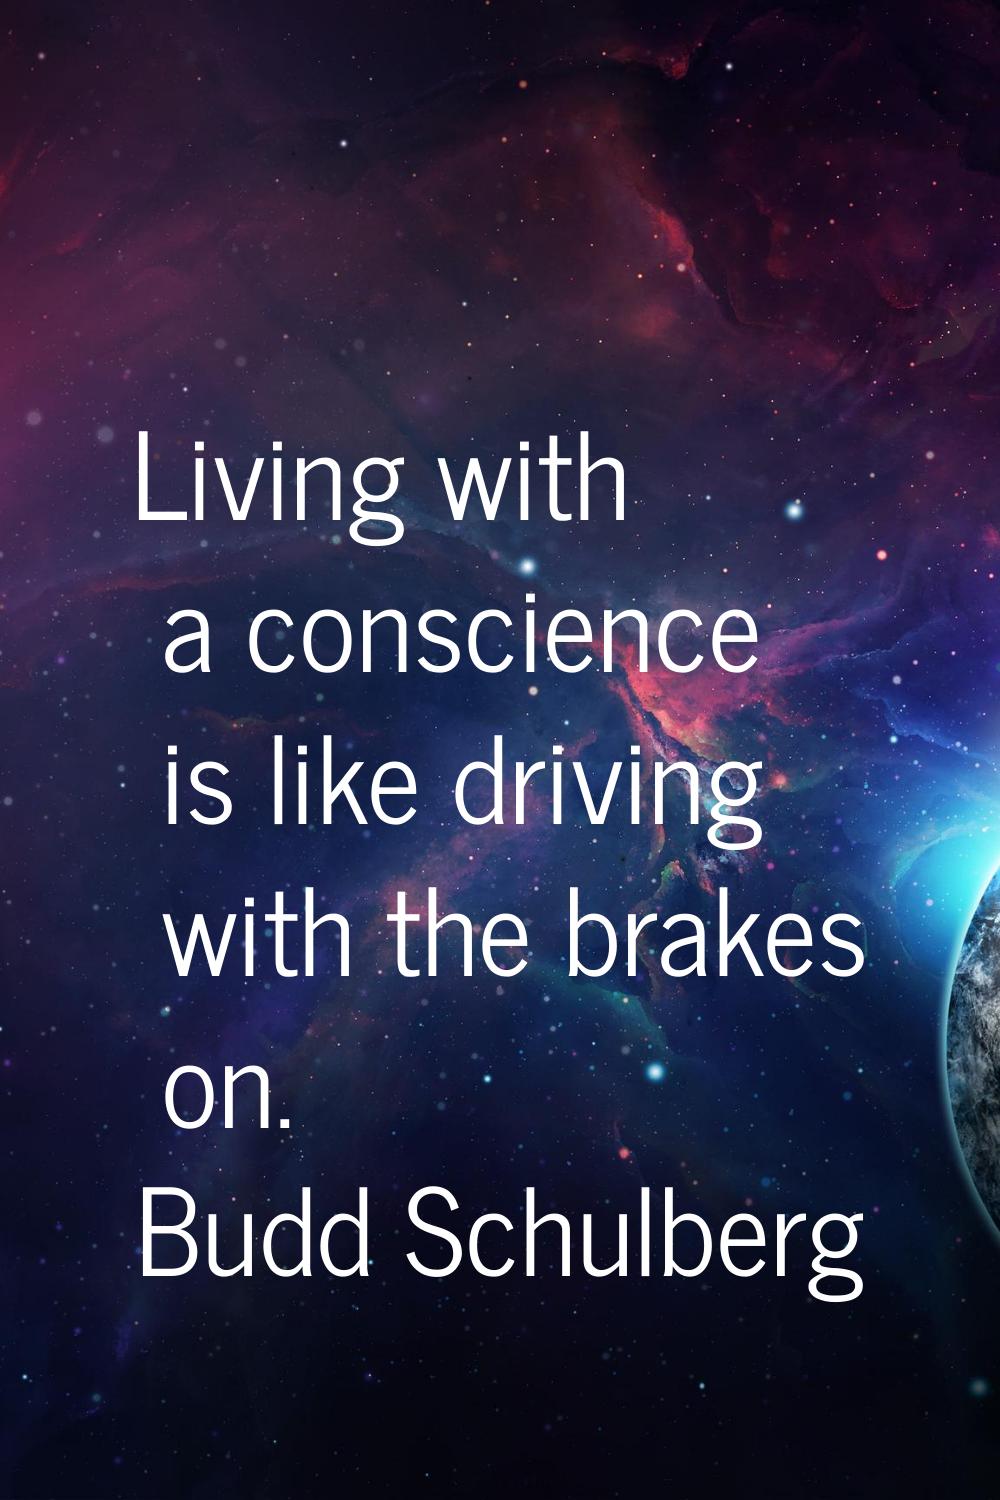 Living with a conscience is like driving with the brakes on.